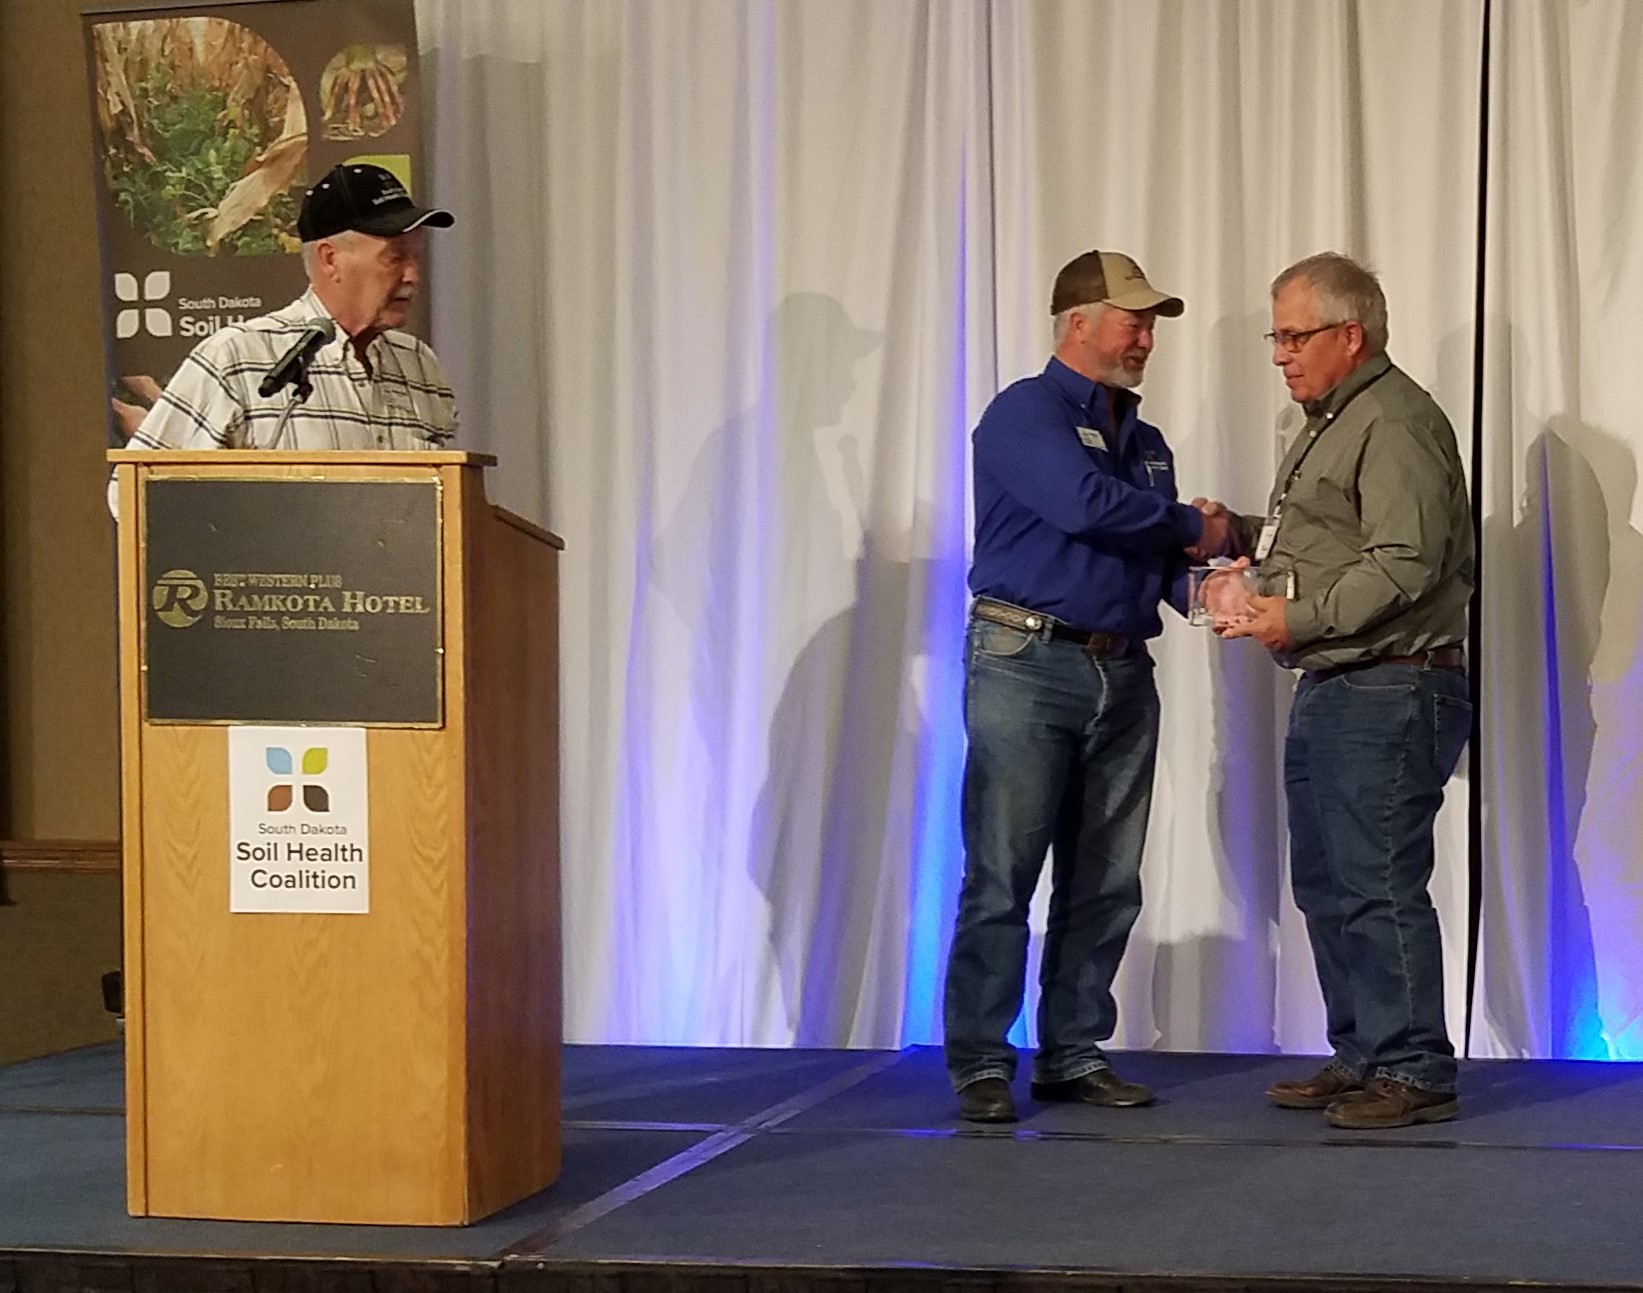 Dan Forgey, right, receives the 2023 Friend of Soil Health Award from SDSHC Board Member Doug Sieck, center, while SDSHC Board member Dennis Hoyle, left, looks on at the 2023 Soil Health Conference, Jan. 24-25 in Sioux Falls.